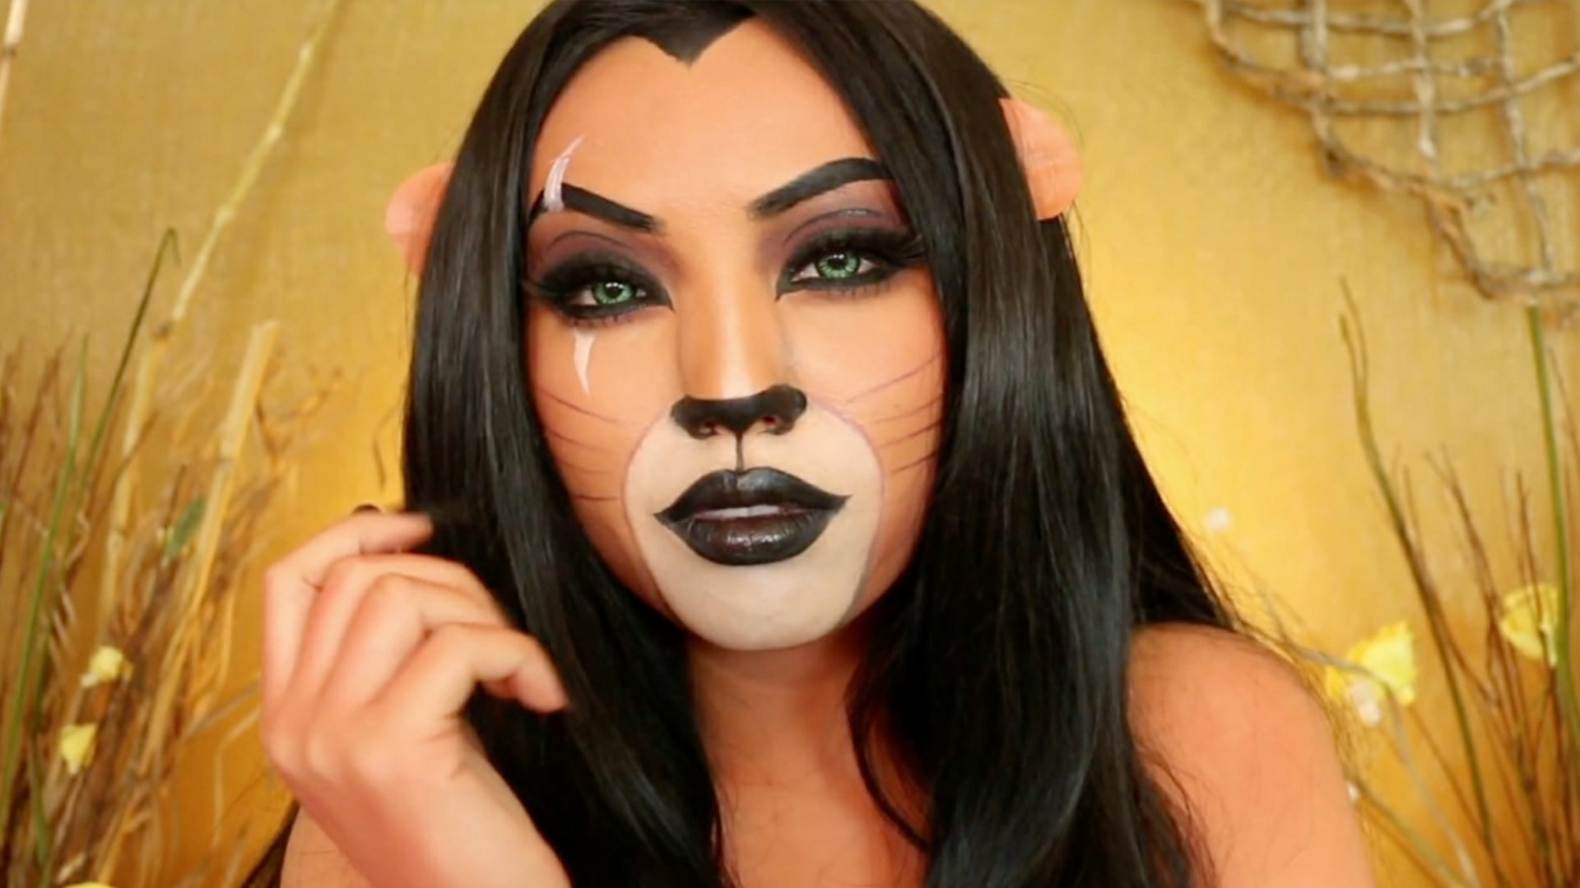 The Kingdom of the Lion Make-up for Women's Carnival Make-up Animal